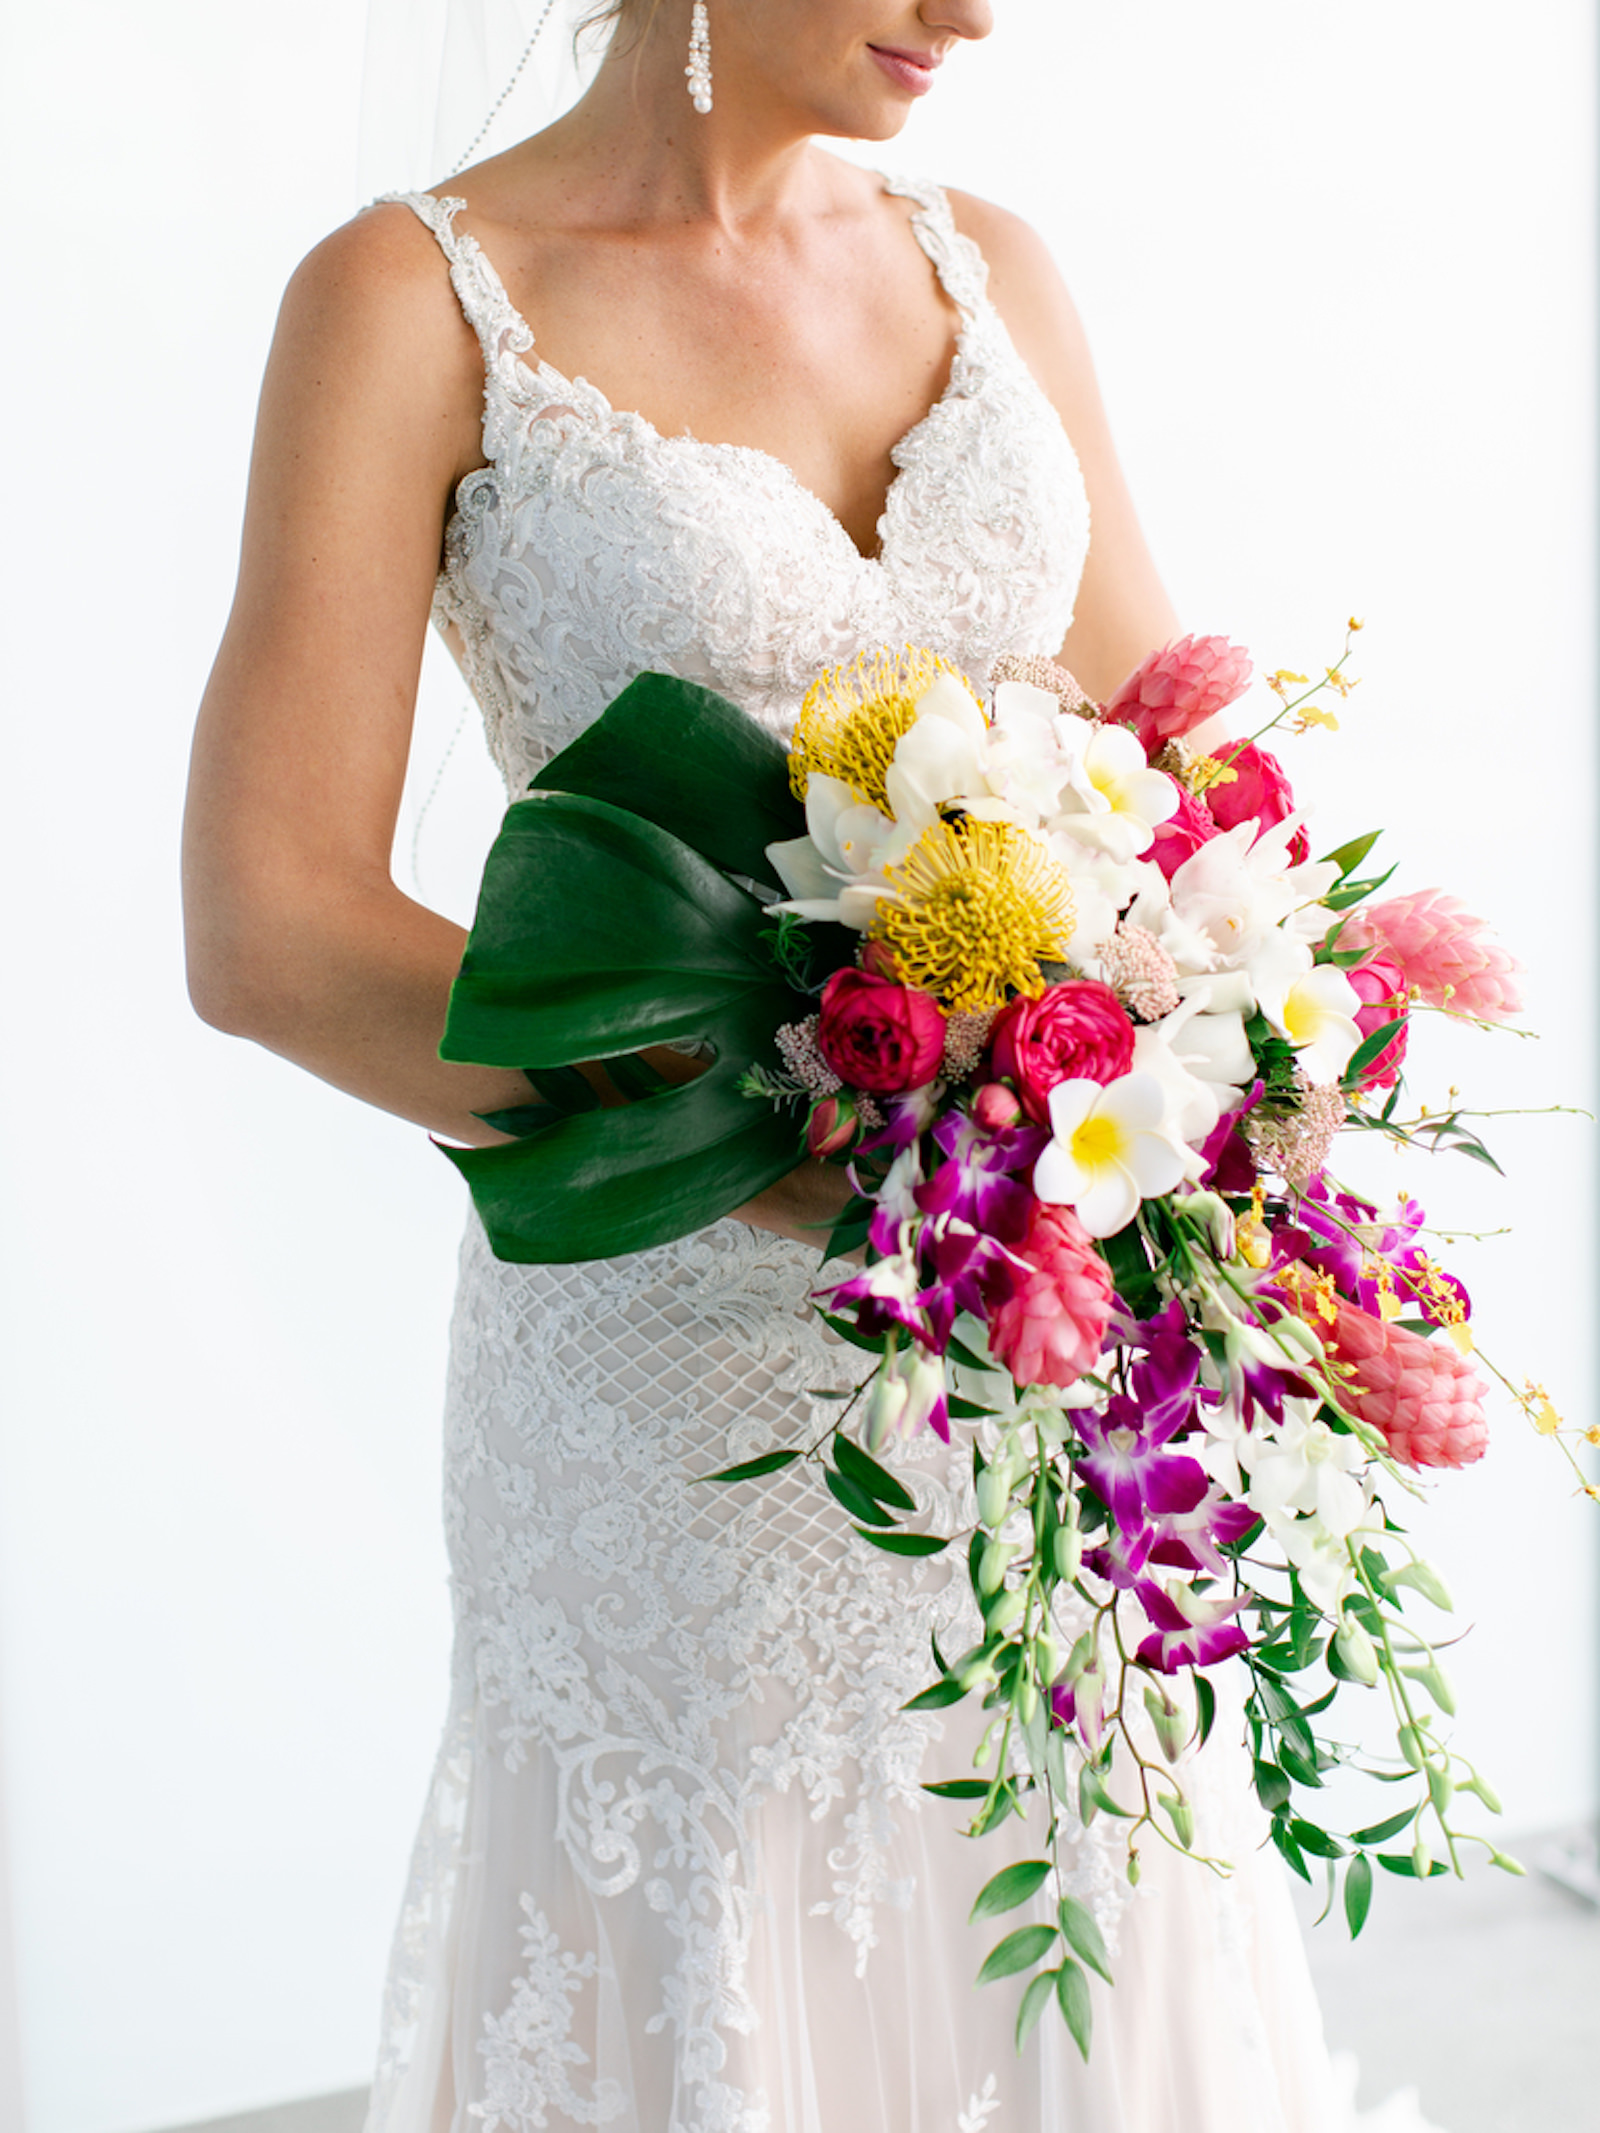 Tropical Elegant Bride in Delicate Lace Wedding Dress Holding Lush Colorful Floral Bouquet with Purple Orchids, Pink Roses, White, Yellow Pincushion Protea Flowers, Greenery and Palm Tree Leaf